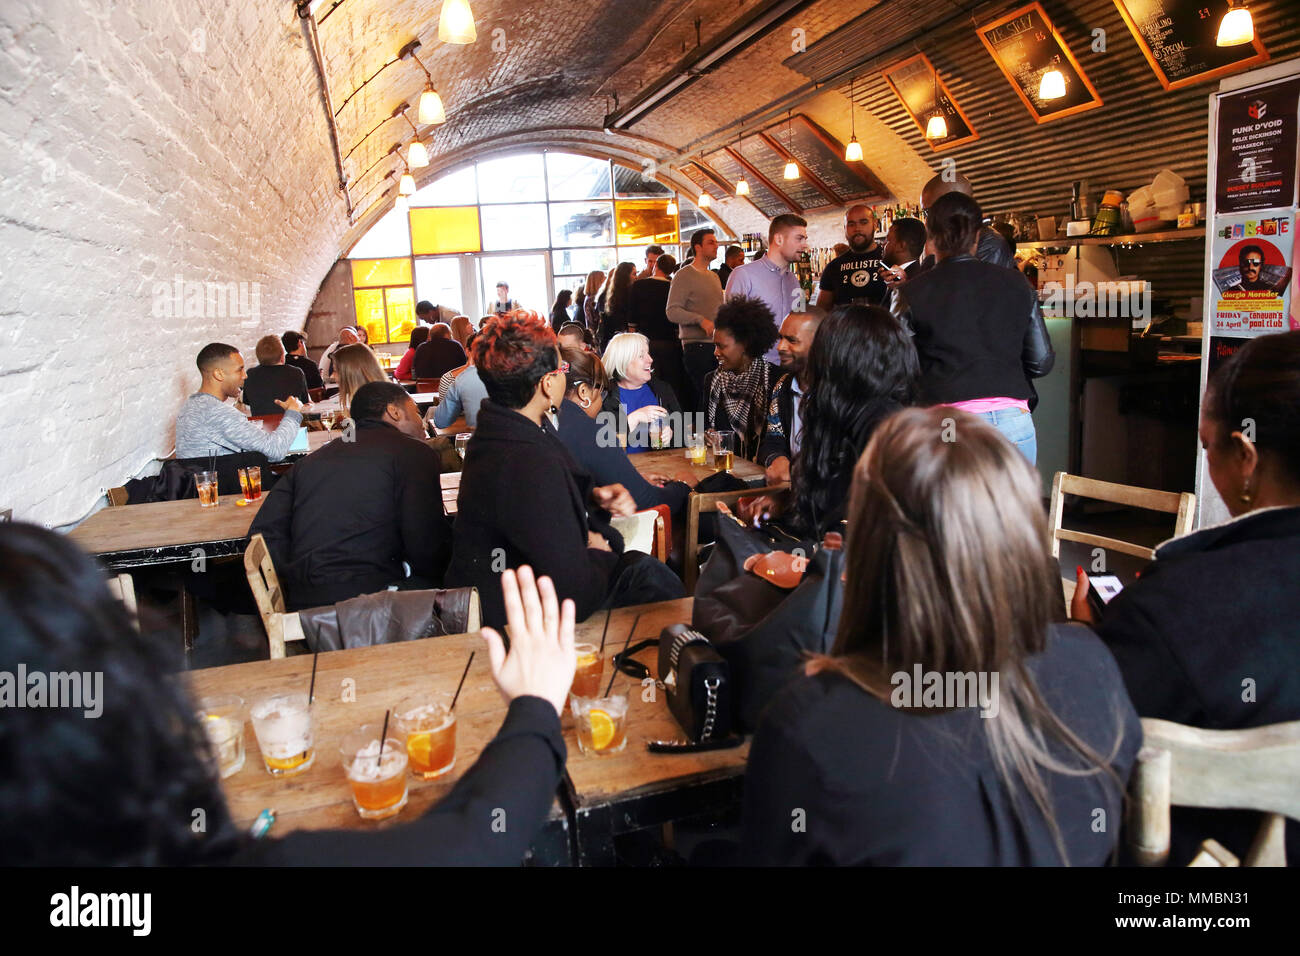 Bar Story, a trendy bar in an arch underneath Peckham Rye railway station, in London SE15, UK Stock Photo